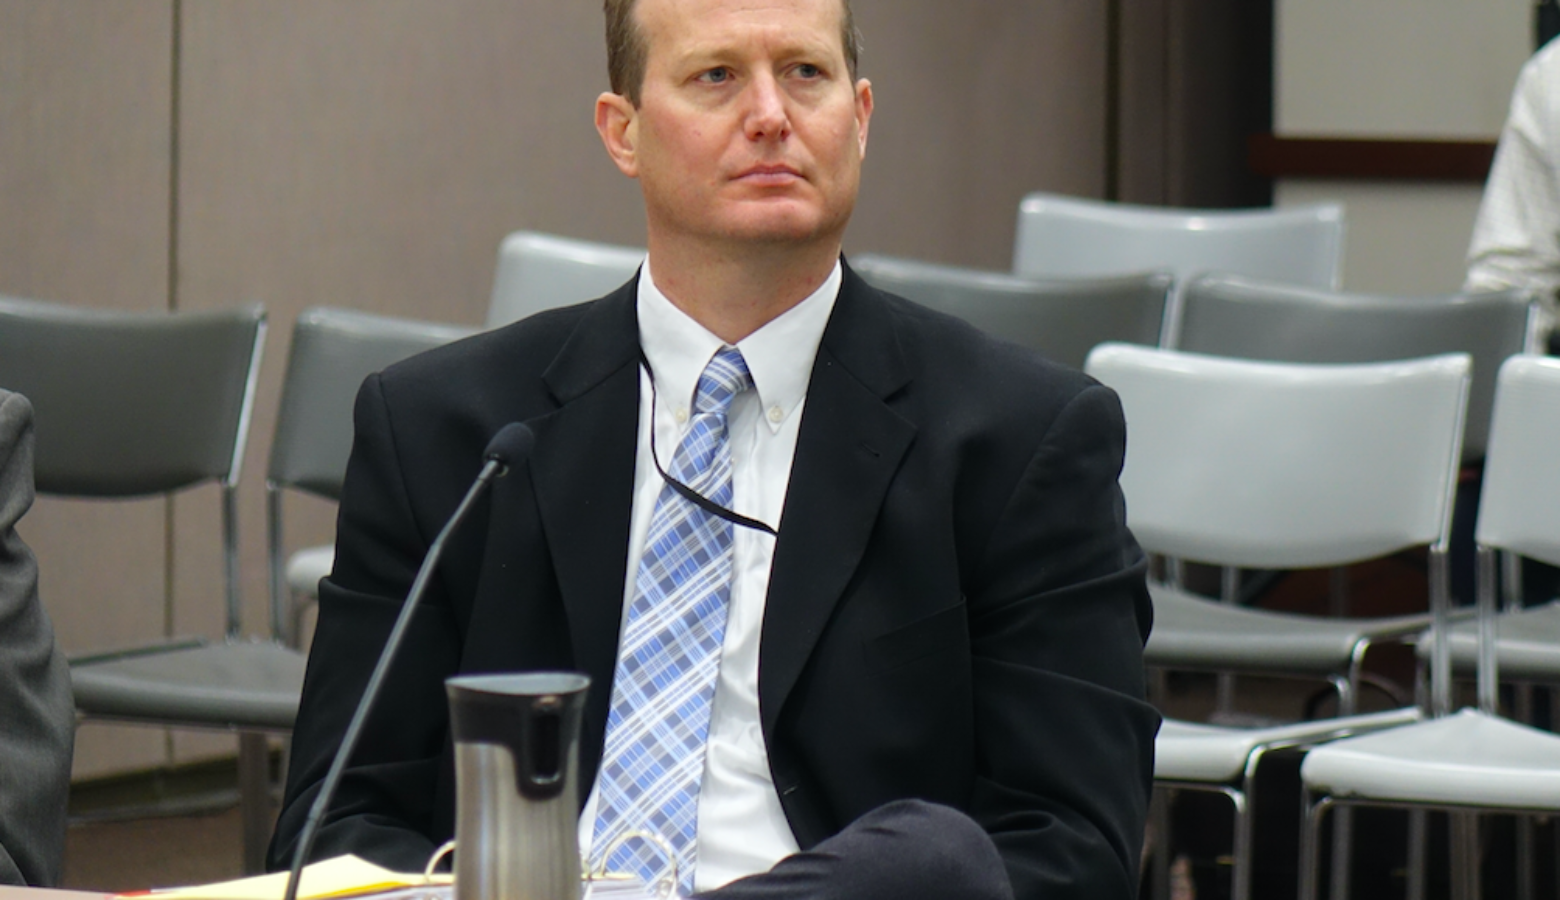 Indiana State Board of Education member Gordon Hendry voted against giving four private schools waivers to accept new vouchers from the Choice Scholarship Program during the June 7, 2017, board meeting in Indianapolis. (Eric Weddle/WFY News)